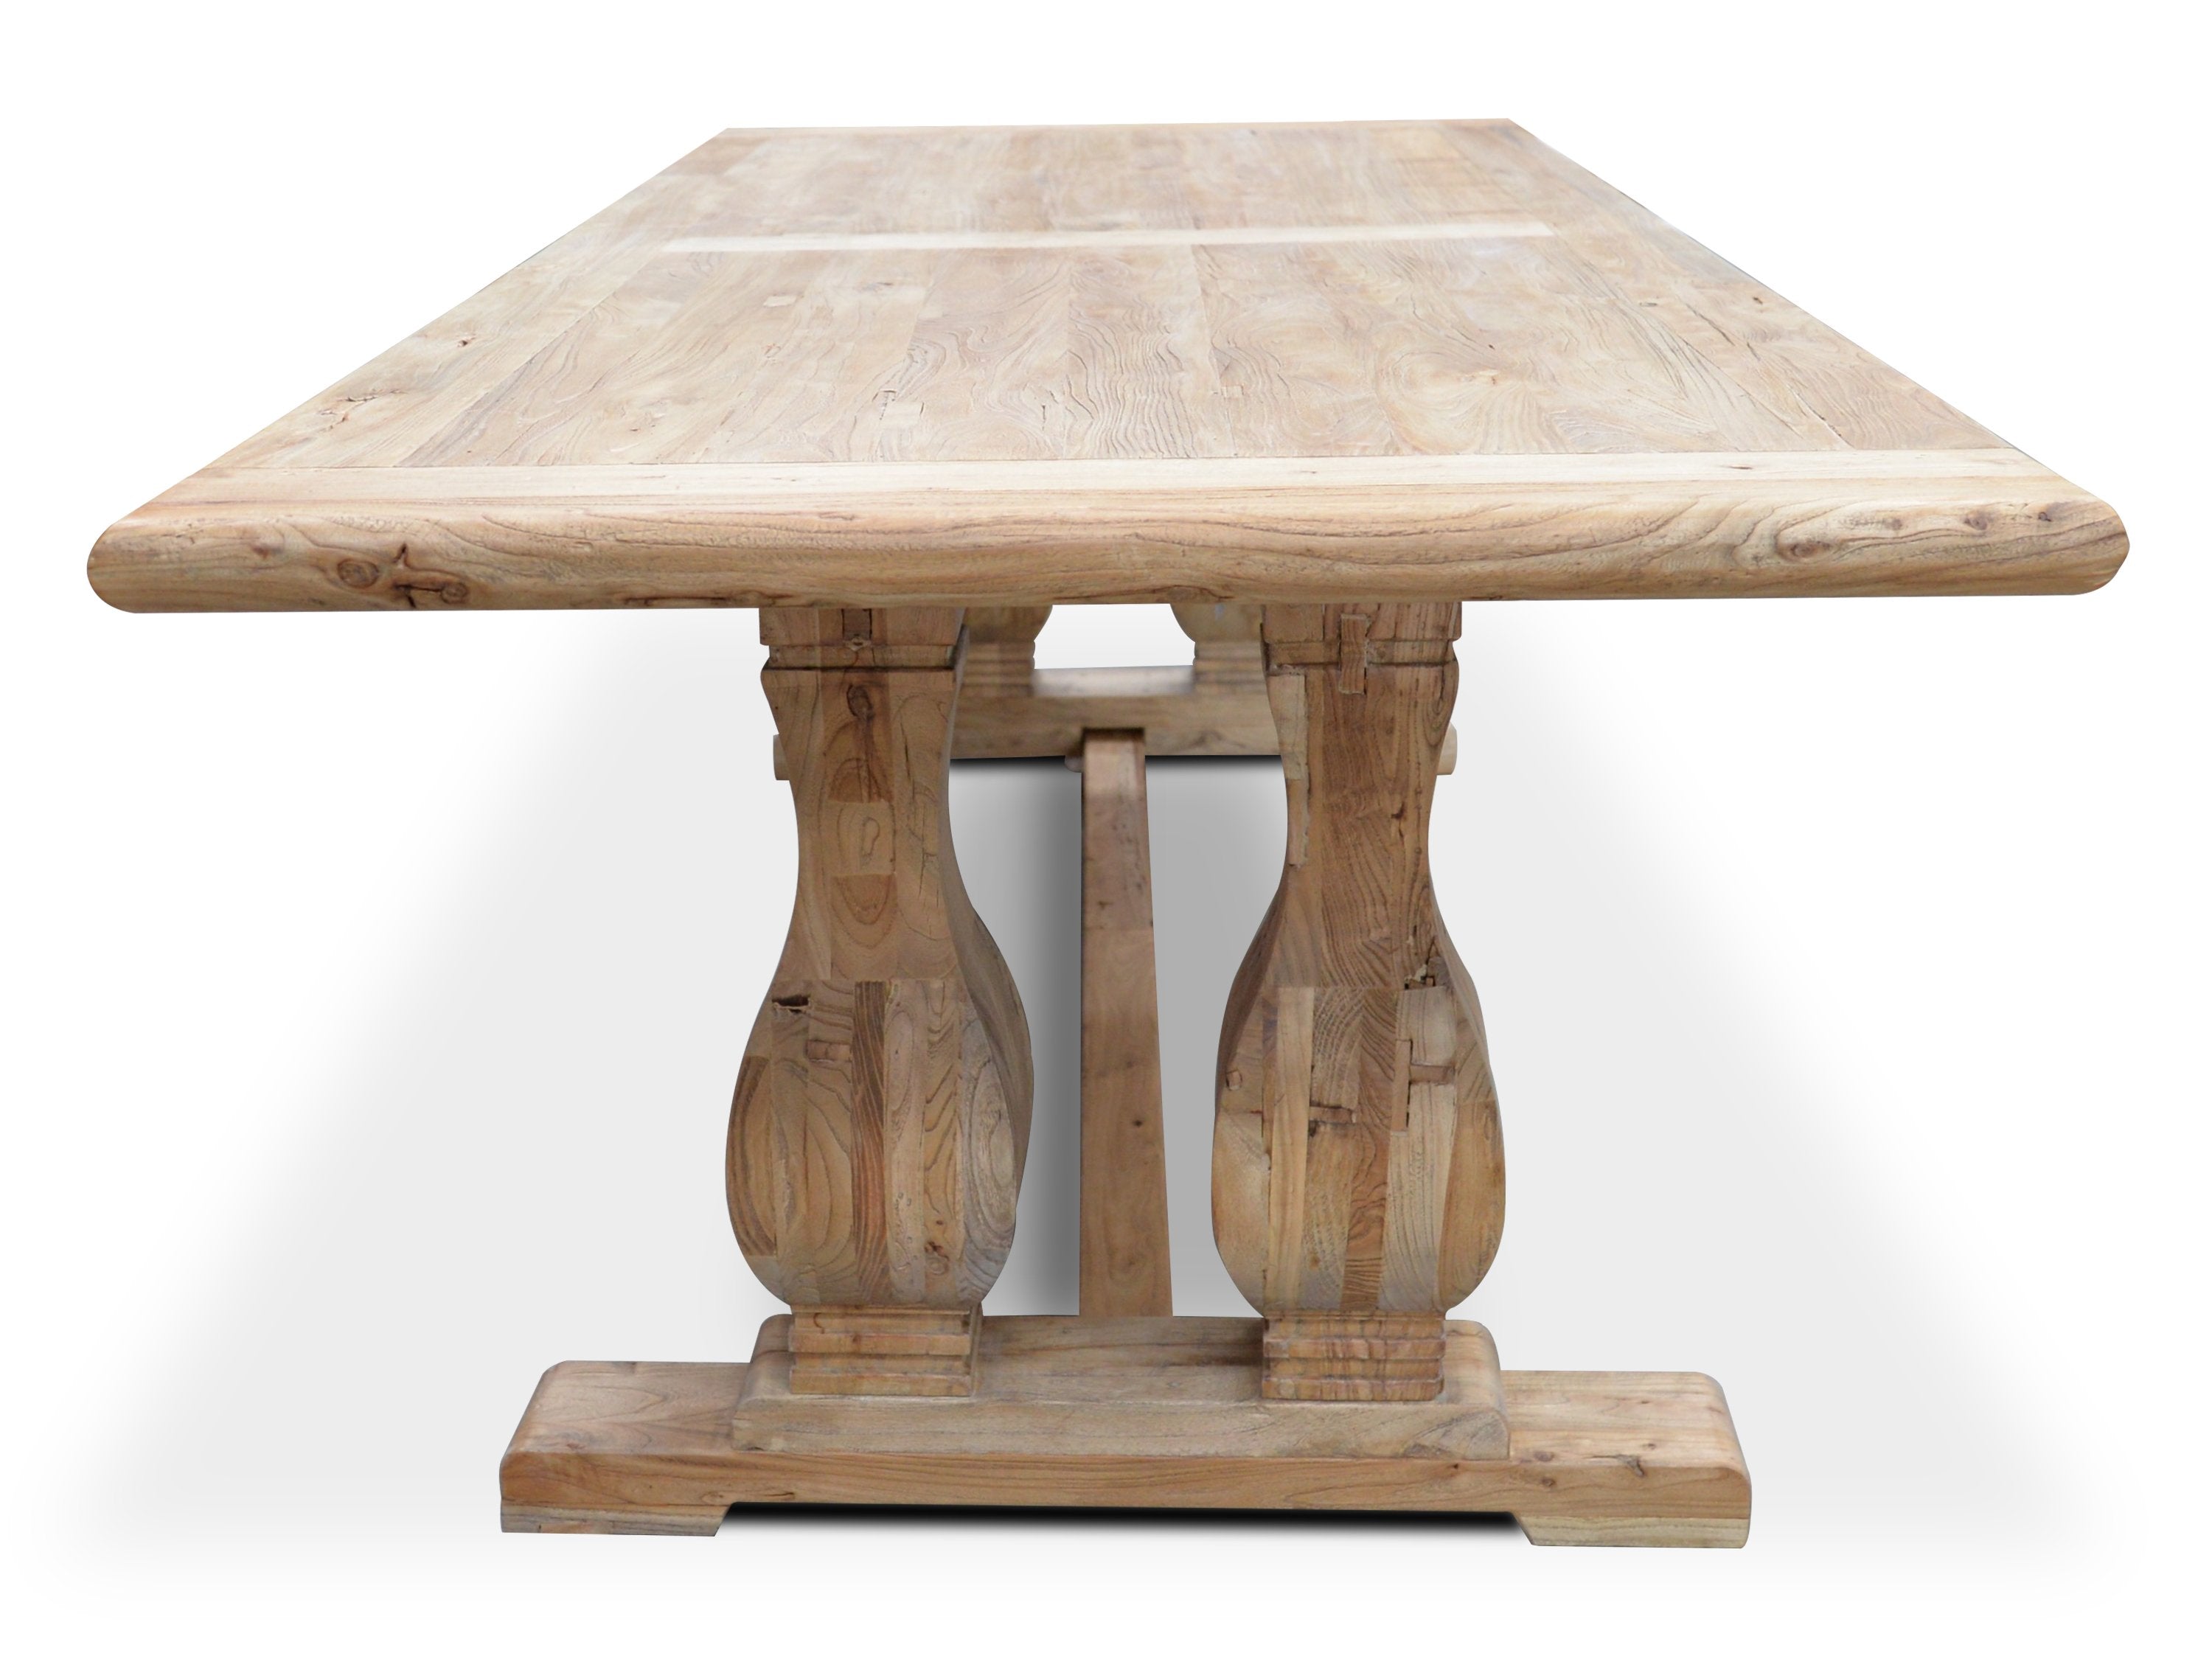 Lima Oak Wood 3m Dining Table - Rustic Natural - Dining Tables